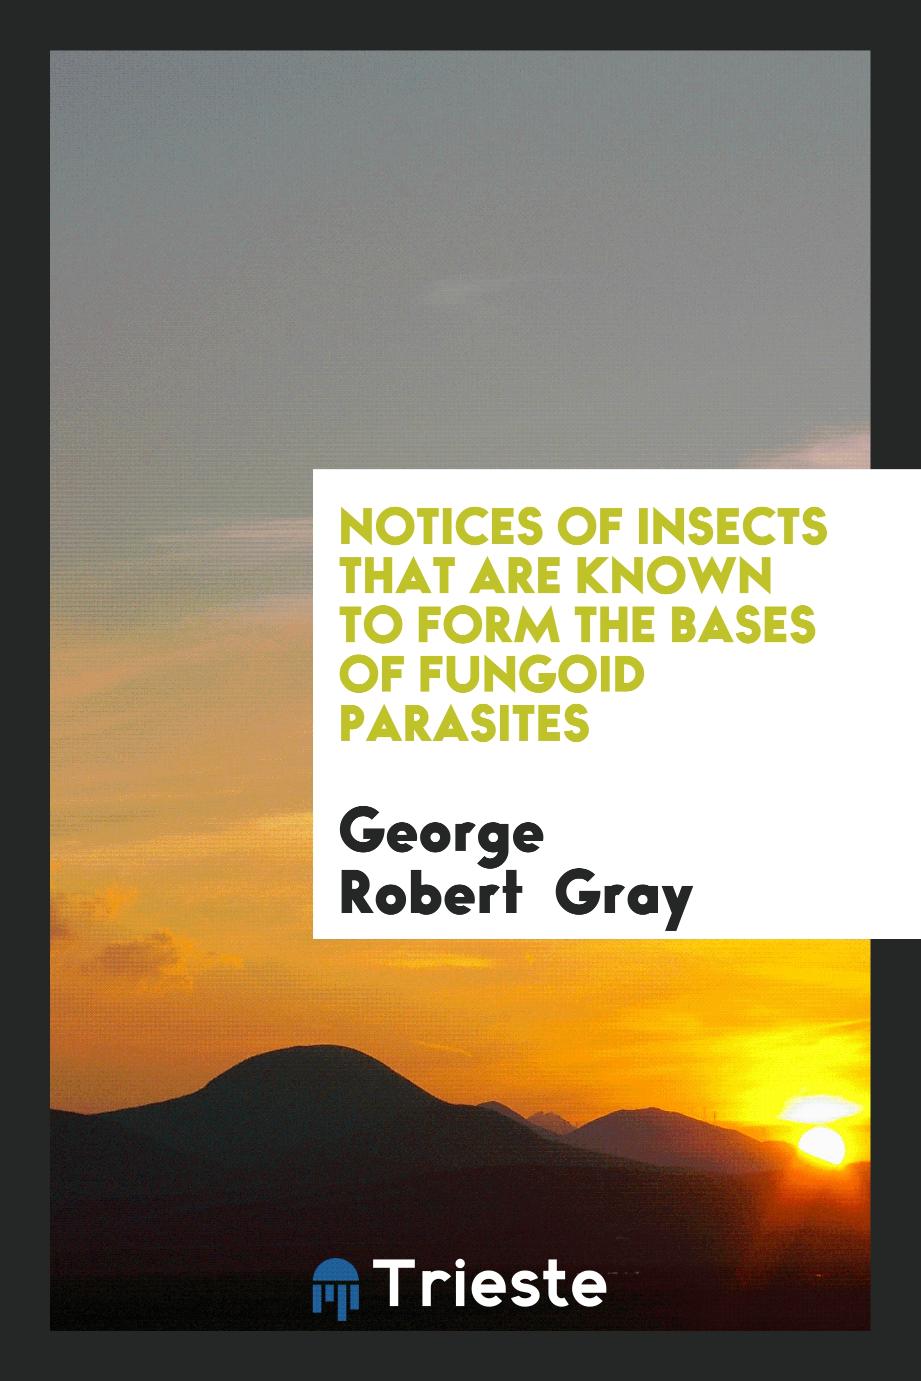 Notices of insects that are known to form the bases of fungoid parasites